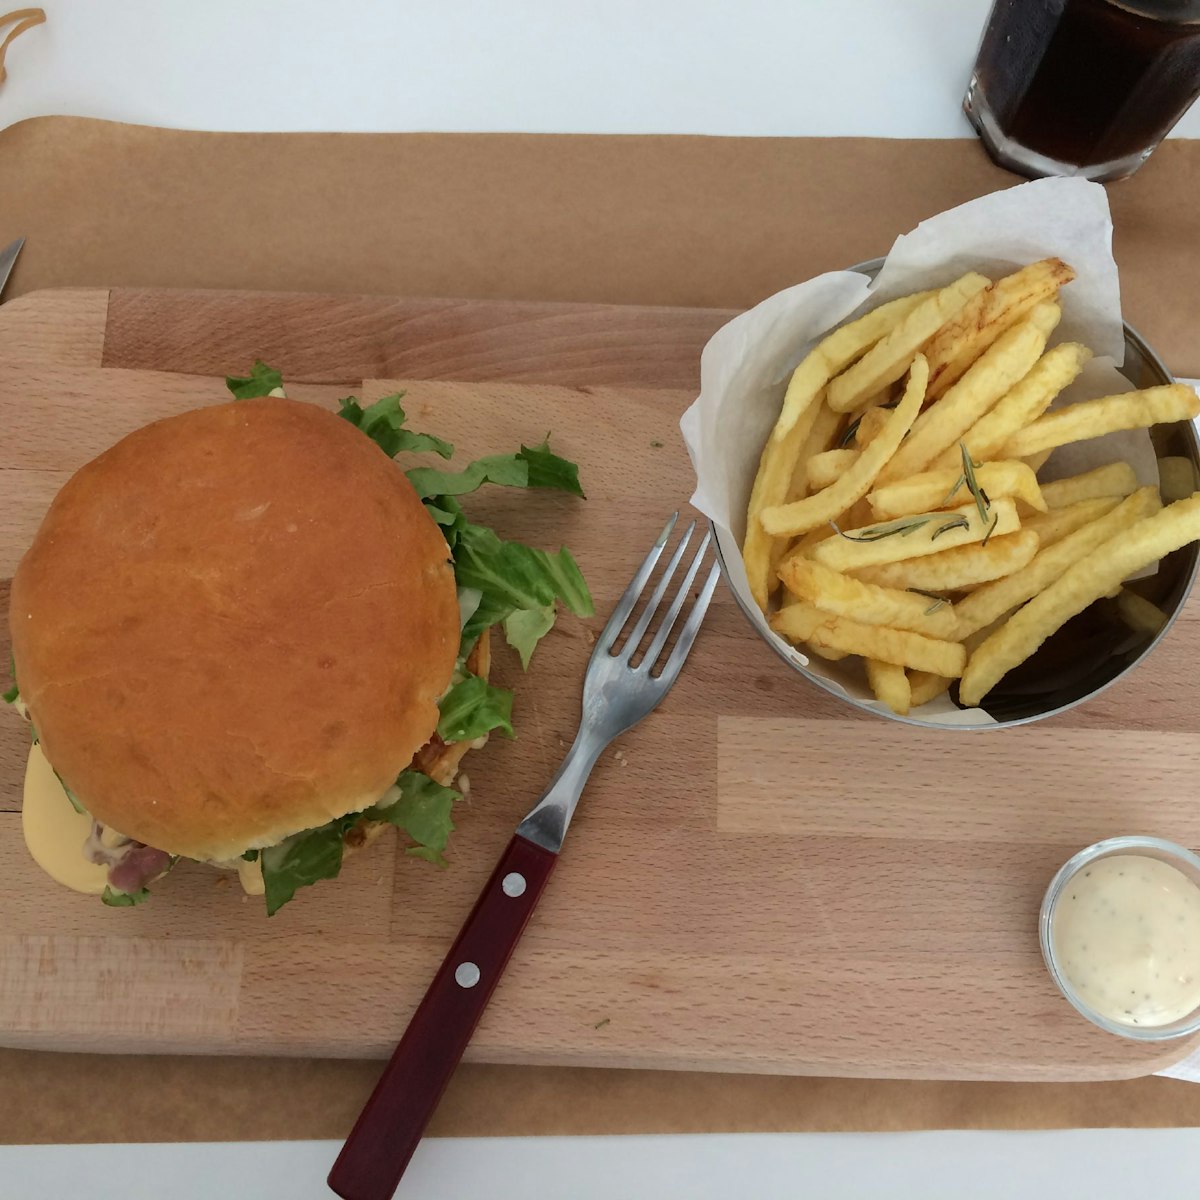 Artisanal burgers made from 100% Azorean beef